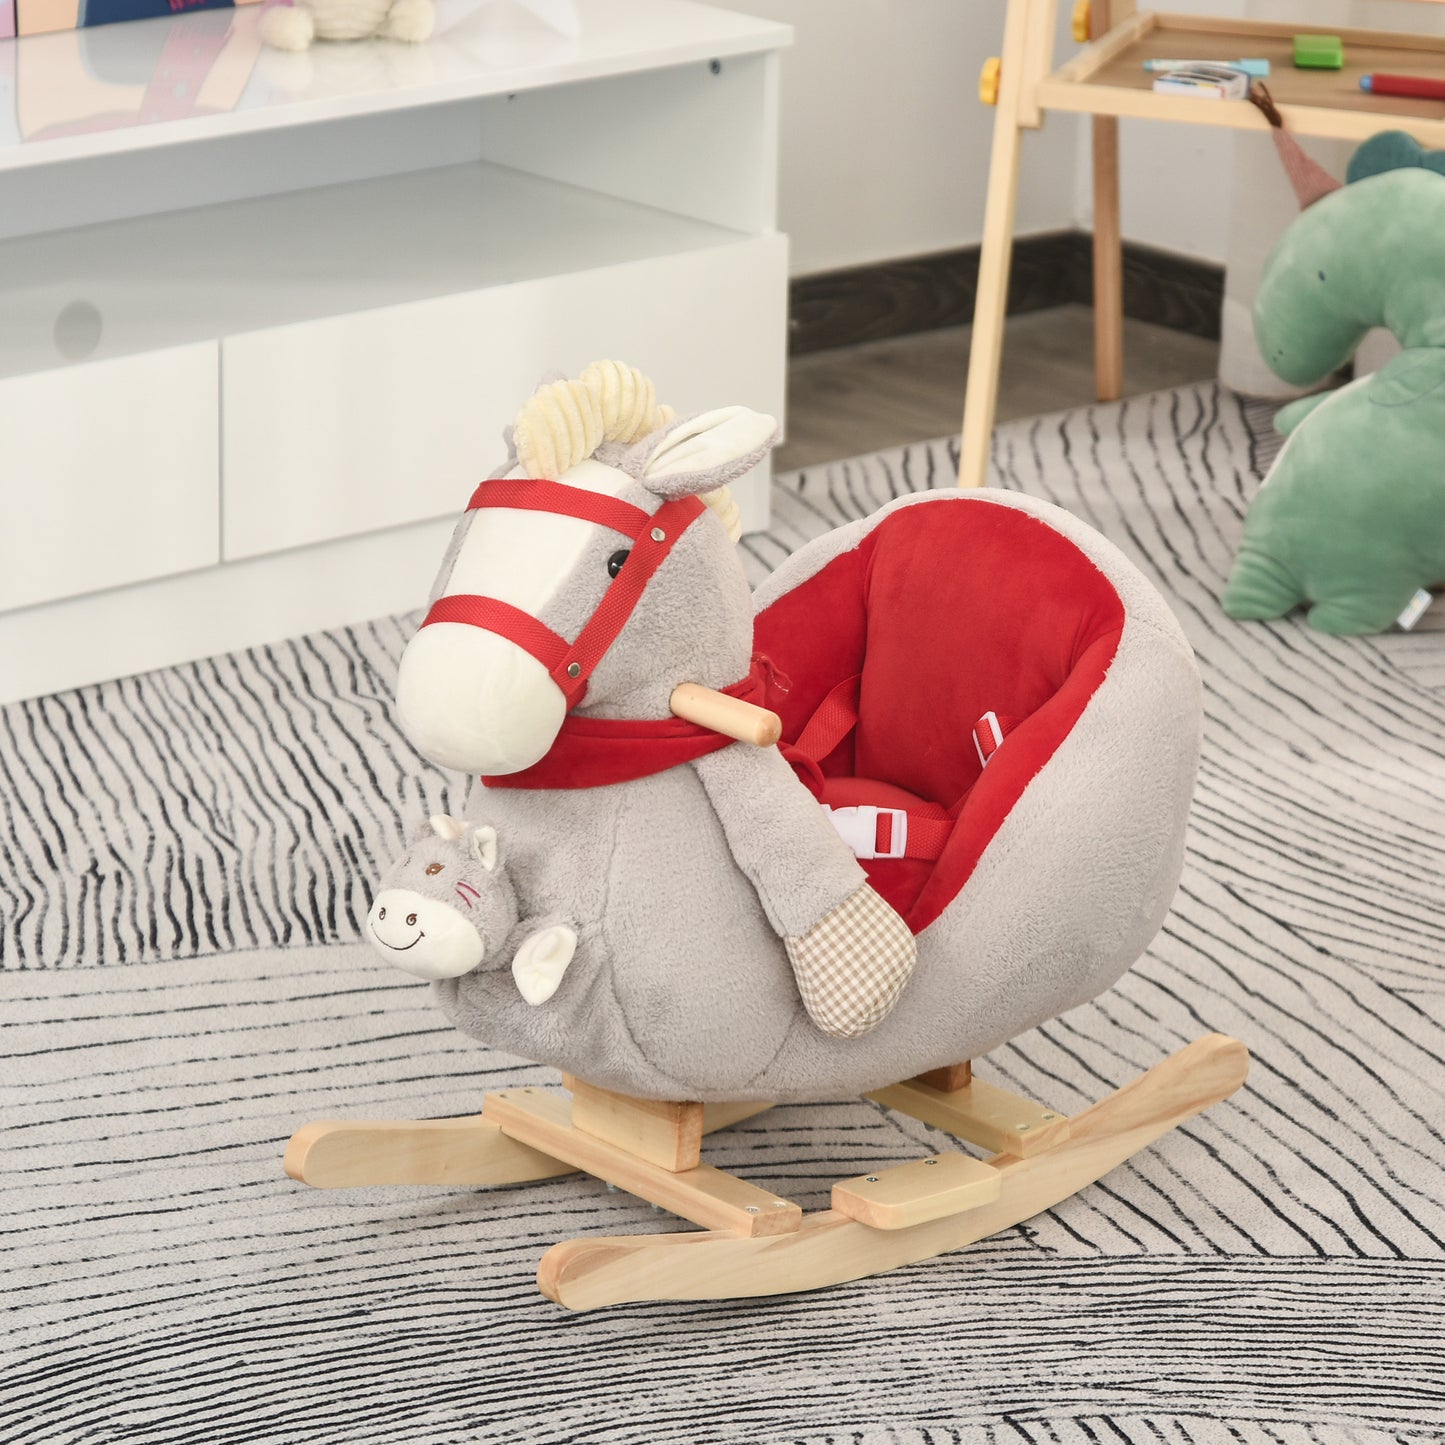 Kids Ride-On Rocking Horse Toy, Rocker with Lullaby Song, Hand Puppets & Soft Plush Fabric for Children 18-36 Months, Gray